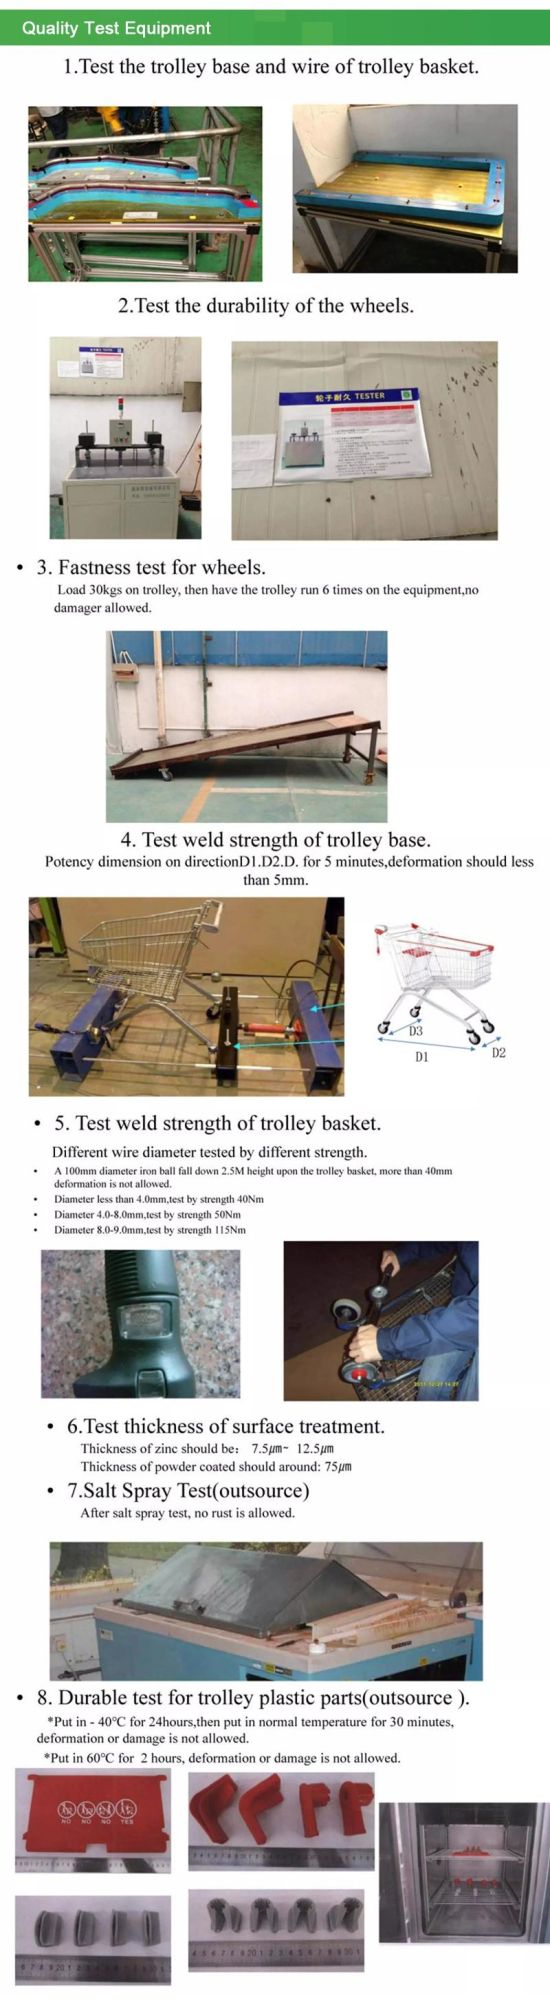 China Manufacturer Hand Shopping Trolley Cart with Chair